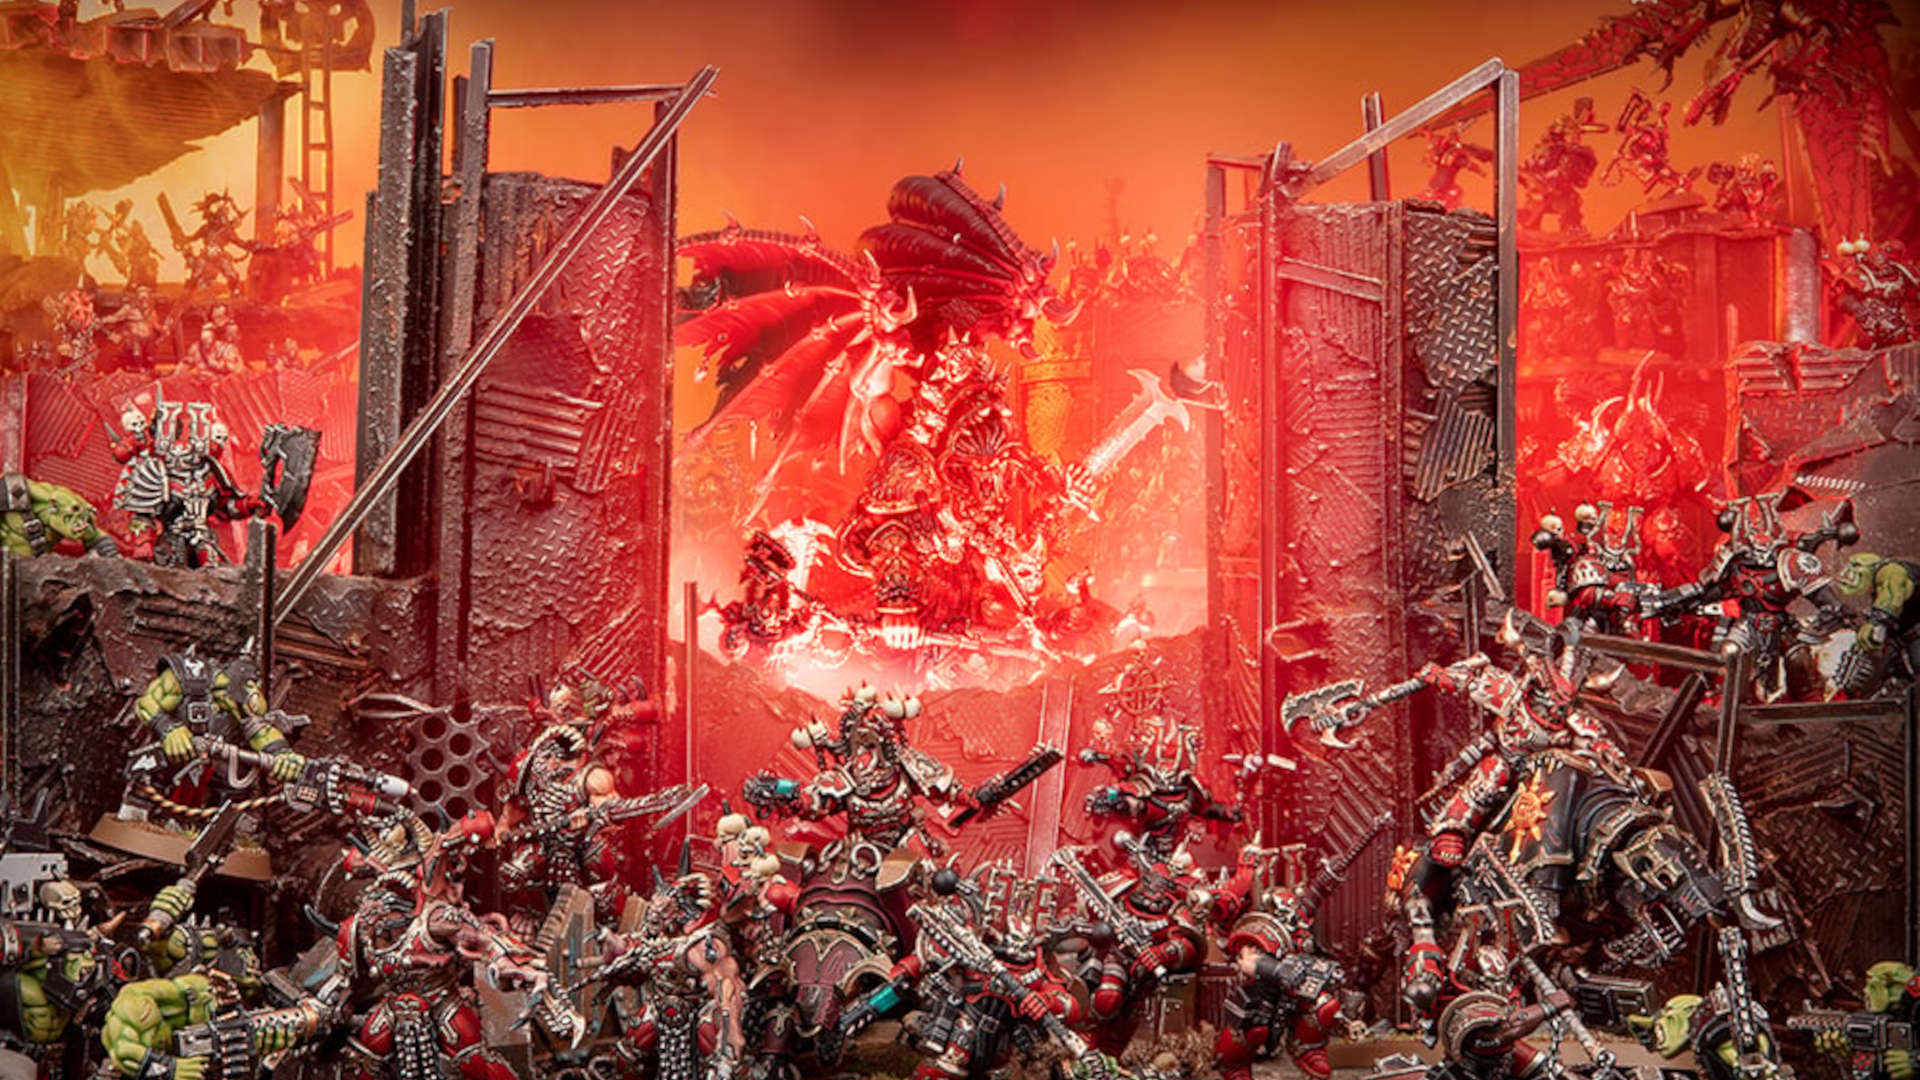 Warhammer 40k World Eaters Codex Review - diorama by Games Workshop, the daemon Angron is summoned in a flash of red light